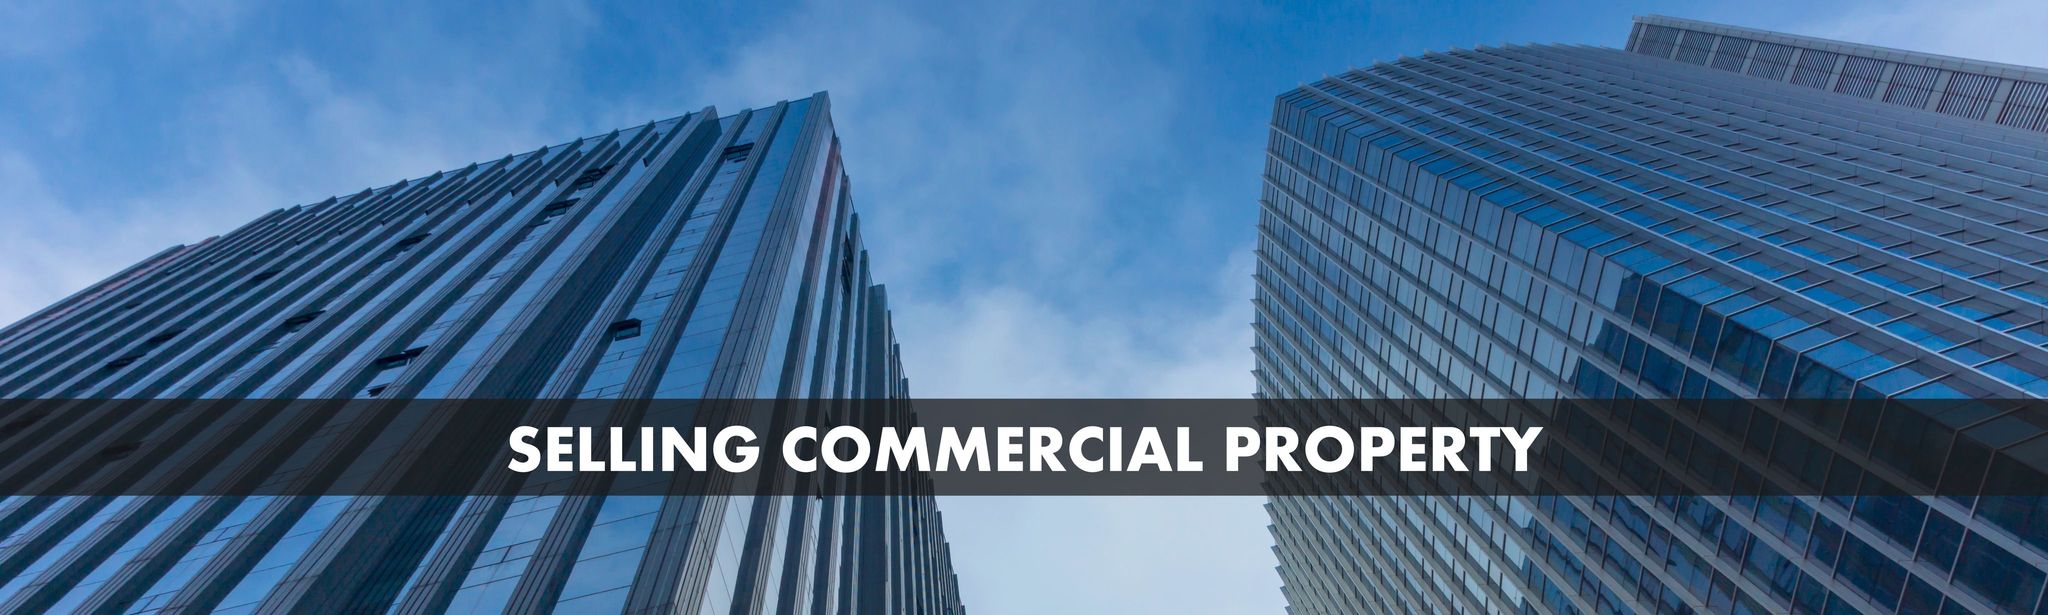 commercial property management tampa